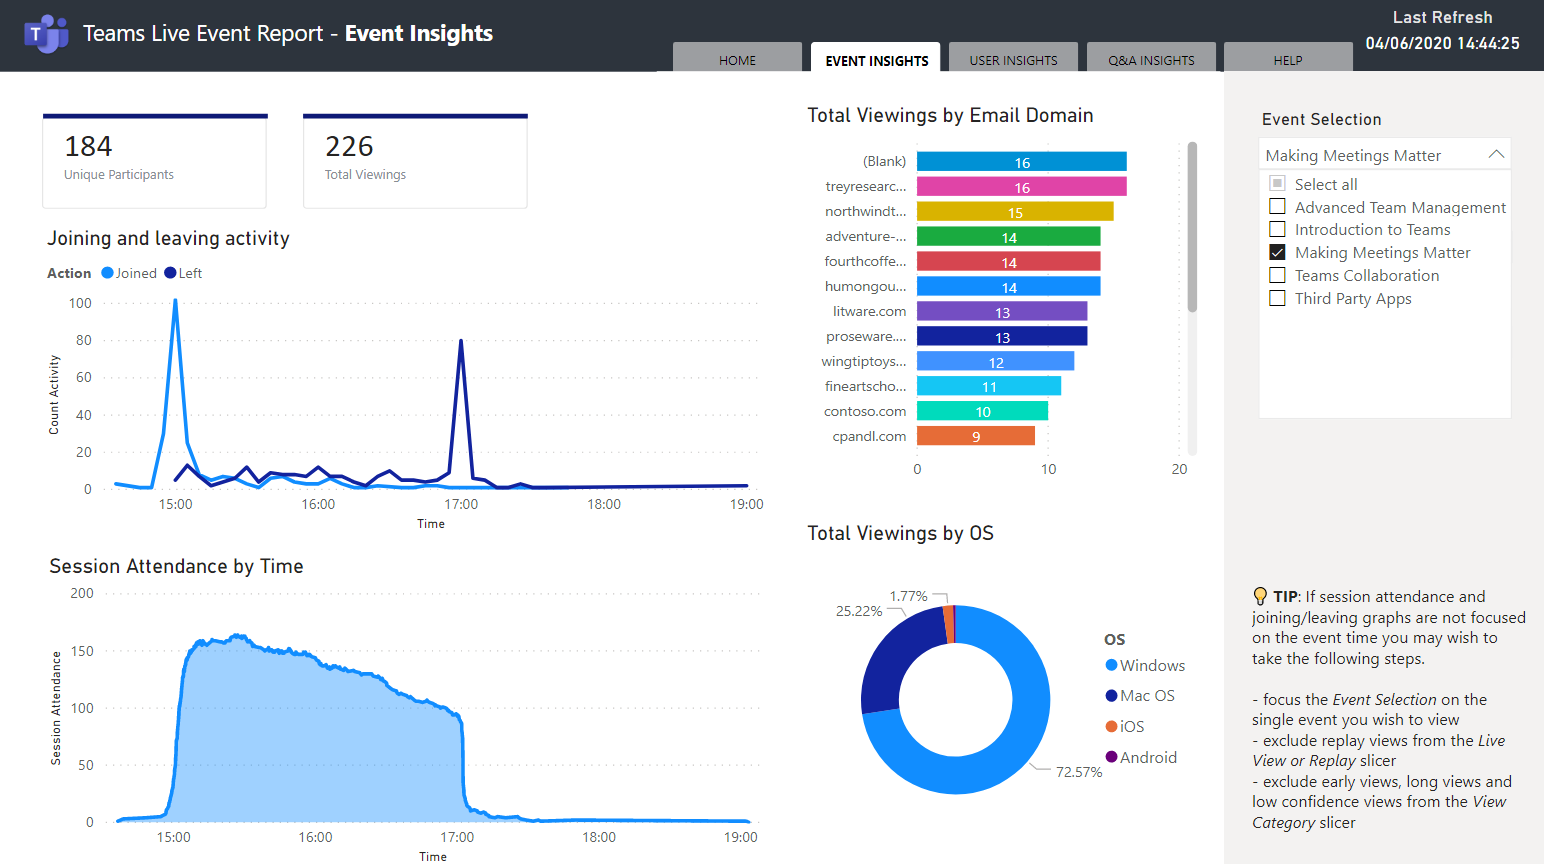 Power BI Dashboard showing sample data for a Teams live event